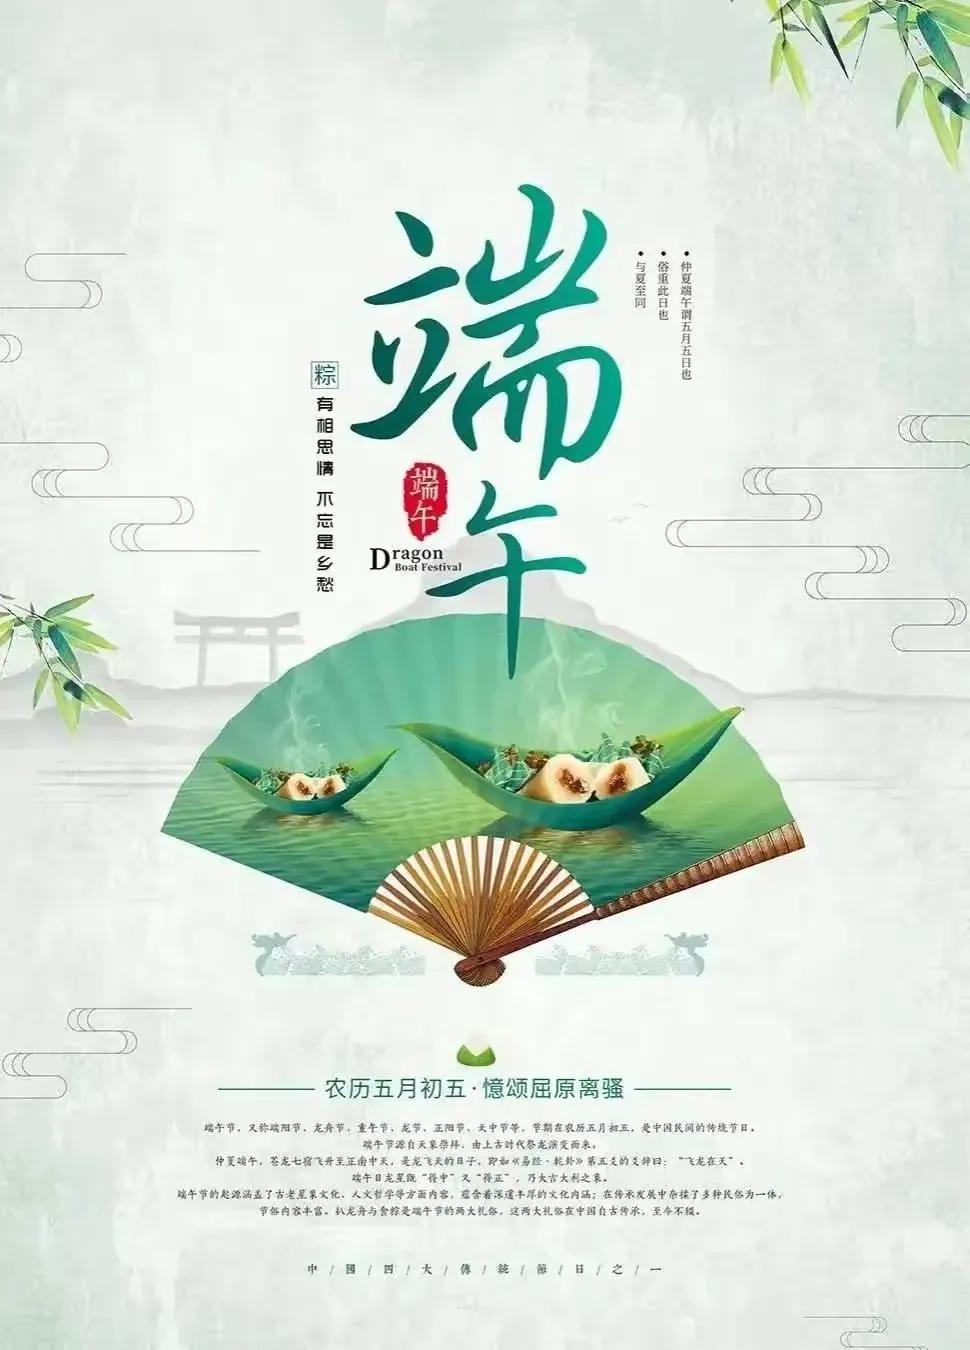 The Dragon Boat Festival is here again. High-definition pictures of the Dragon Boat Festival. I wish everyone a healthy Dragon Boat Festival.